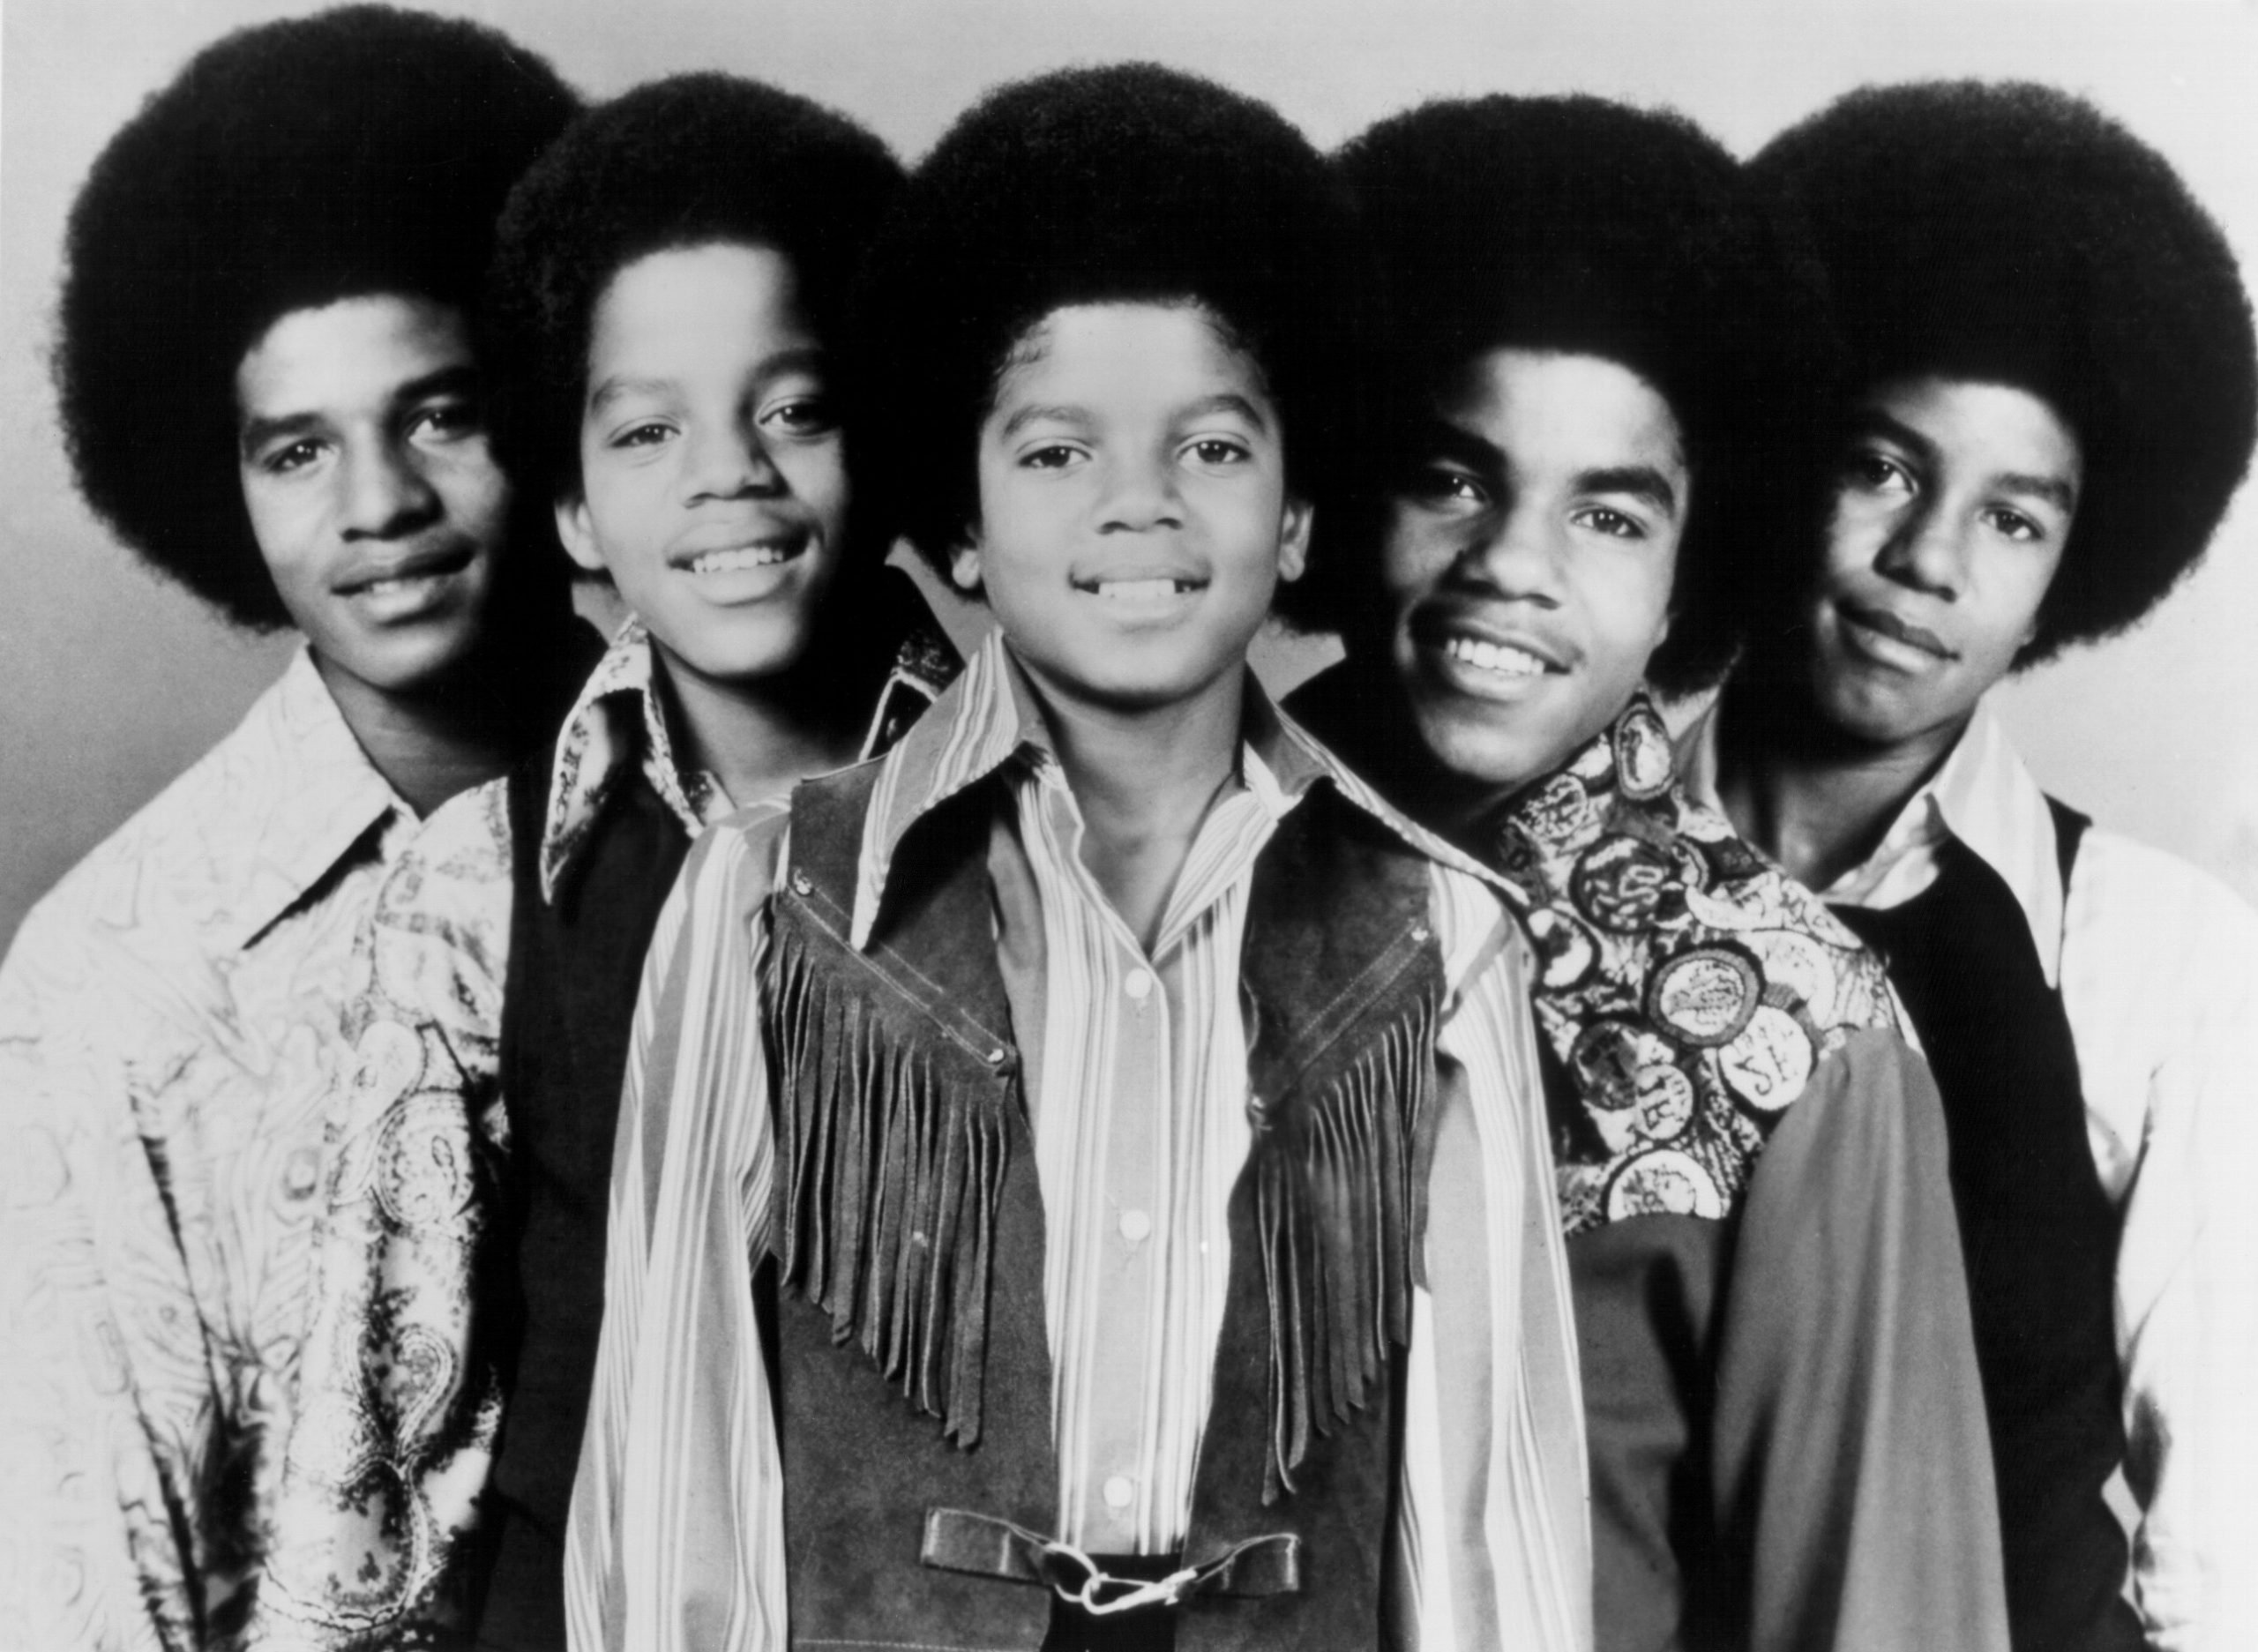 Michael Jackson and the rest of The Jackson 5